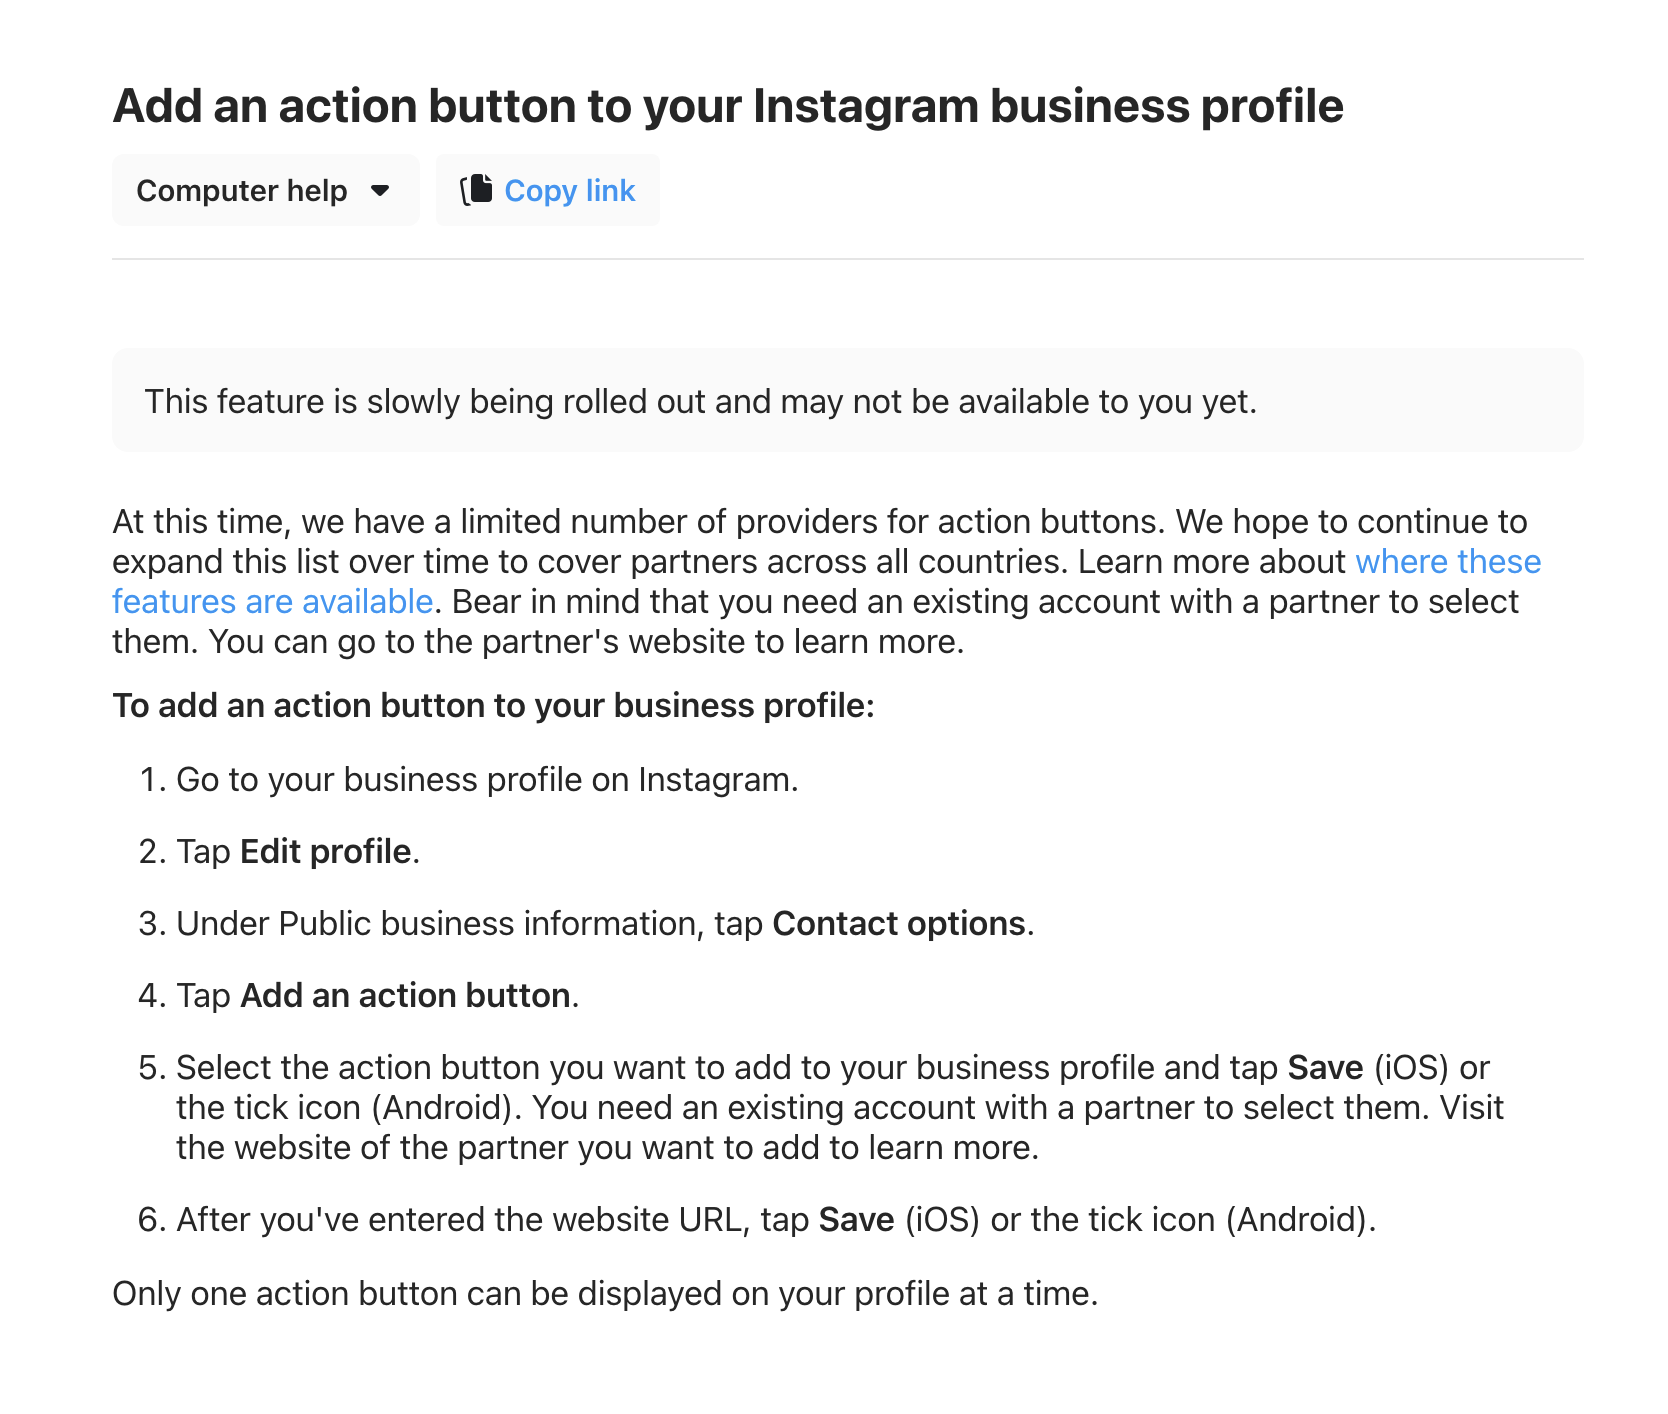 Instructions to Installing an Instagram Action Button